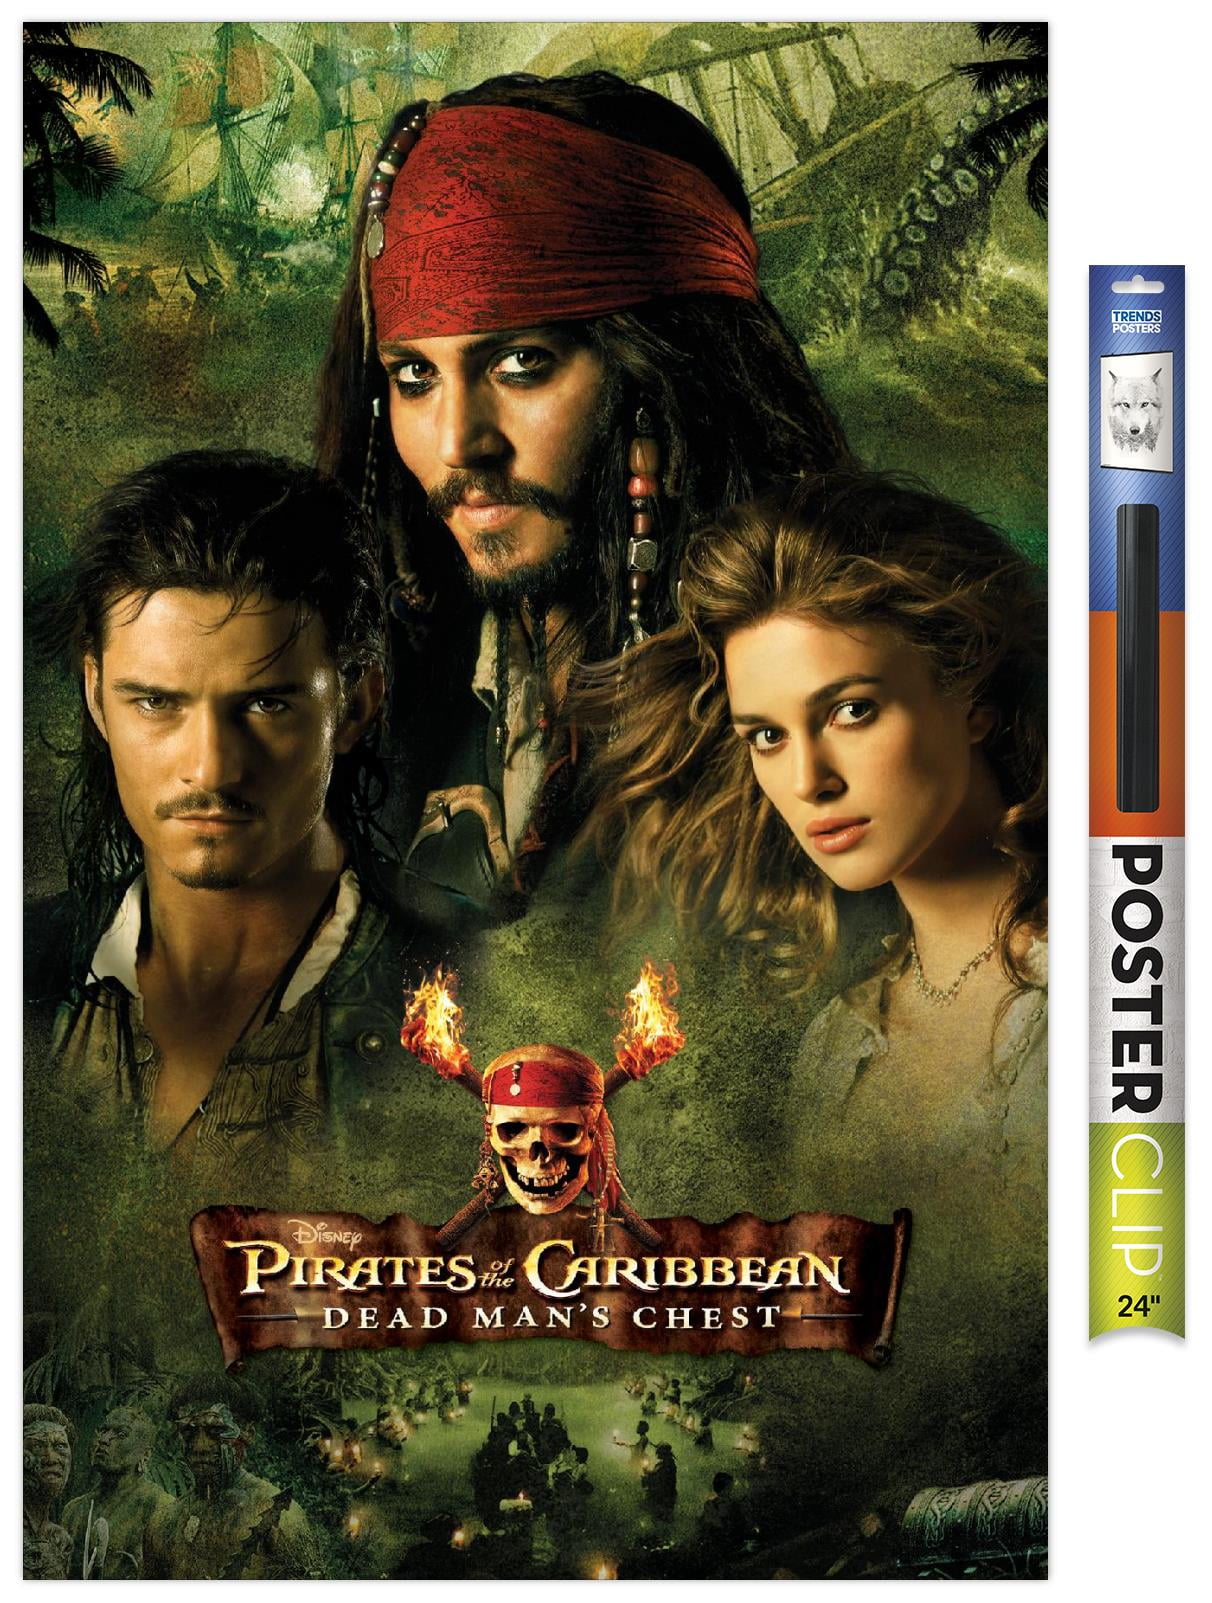 Disney Pirates of the Caribbean: Dead Man's Chest - Group ...